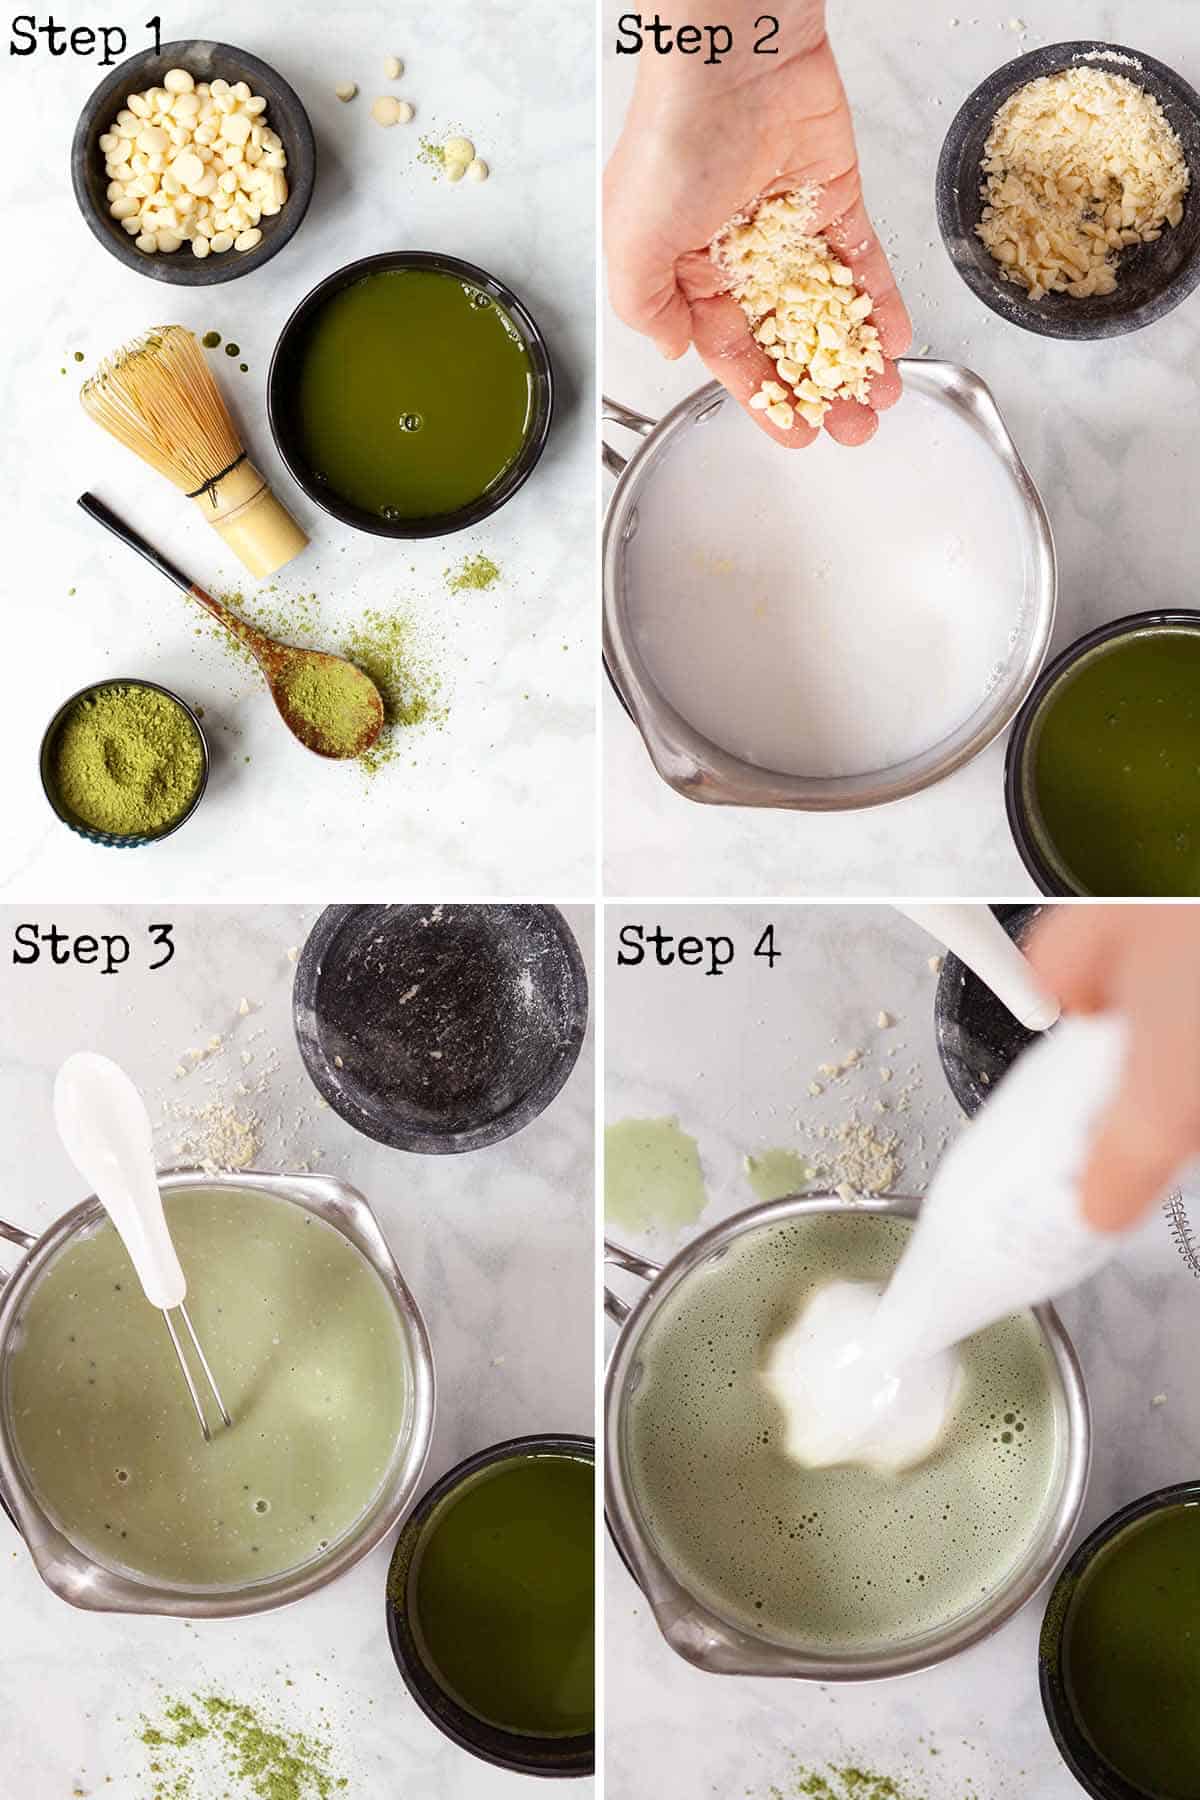 Step by step collage showing how to make a green tea drink